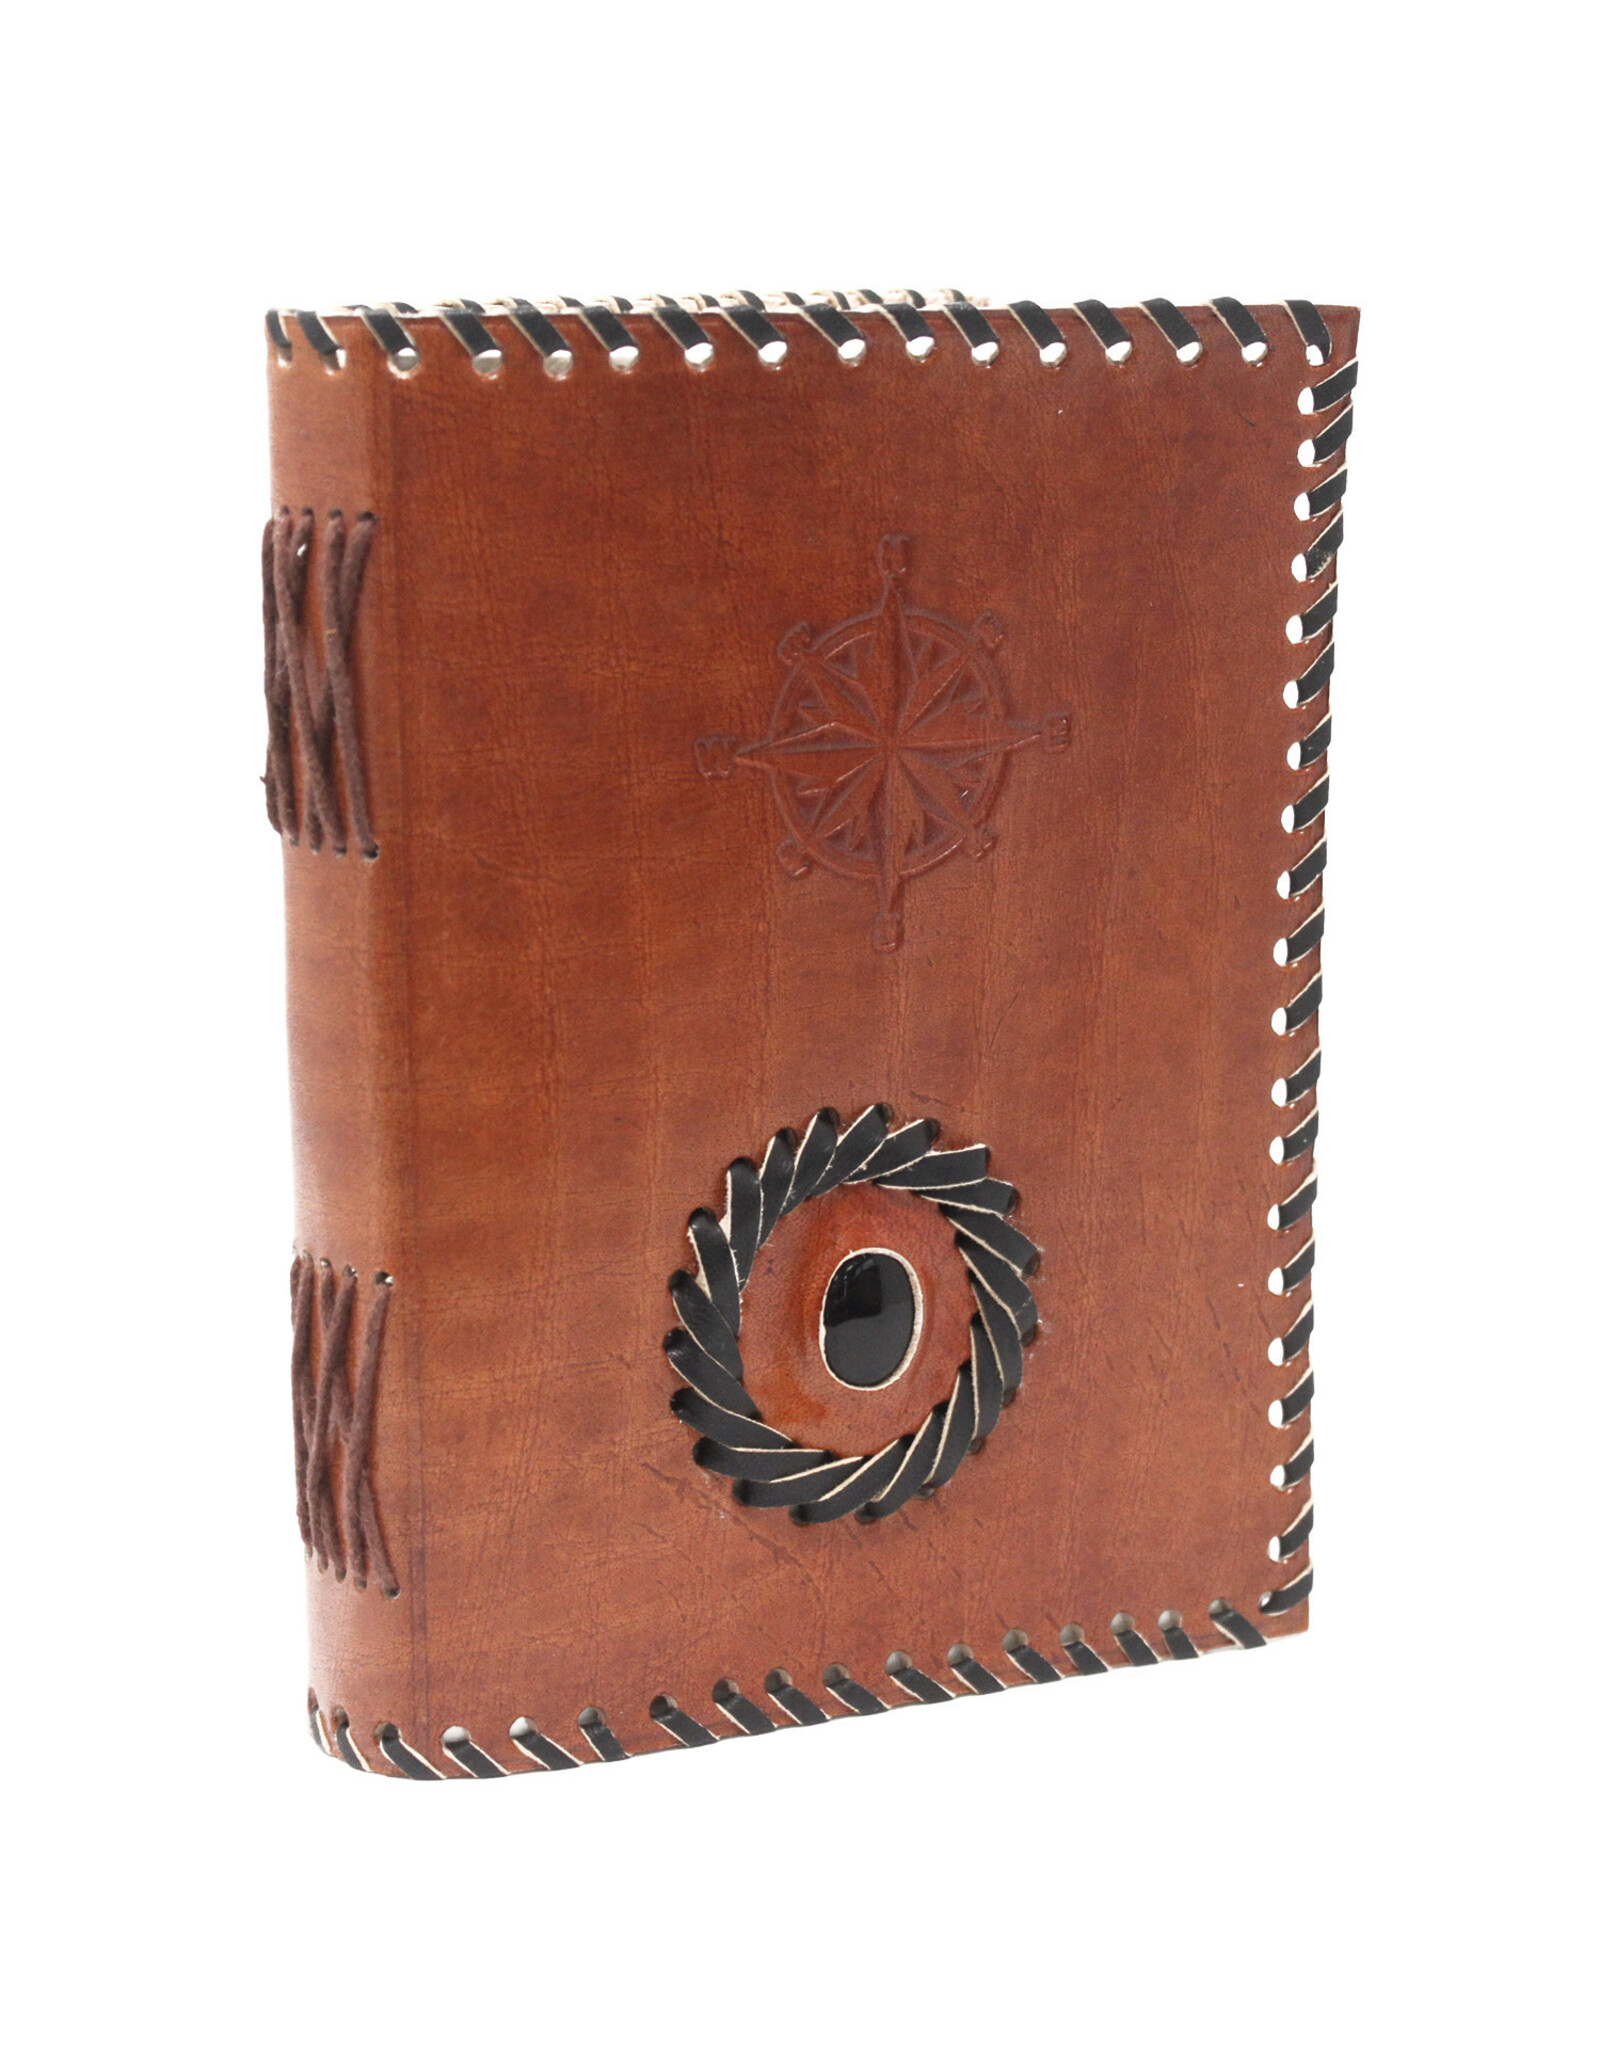 AWG Miscellaneous - Leather Notebook with Black Onyx & Compass 17cm x 12 cm